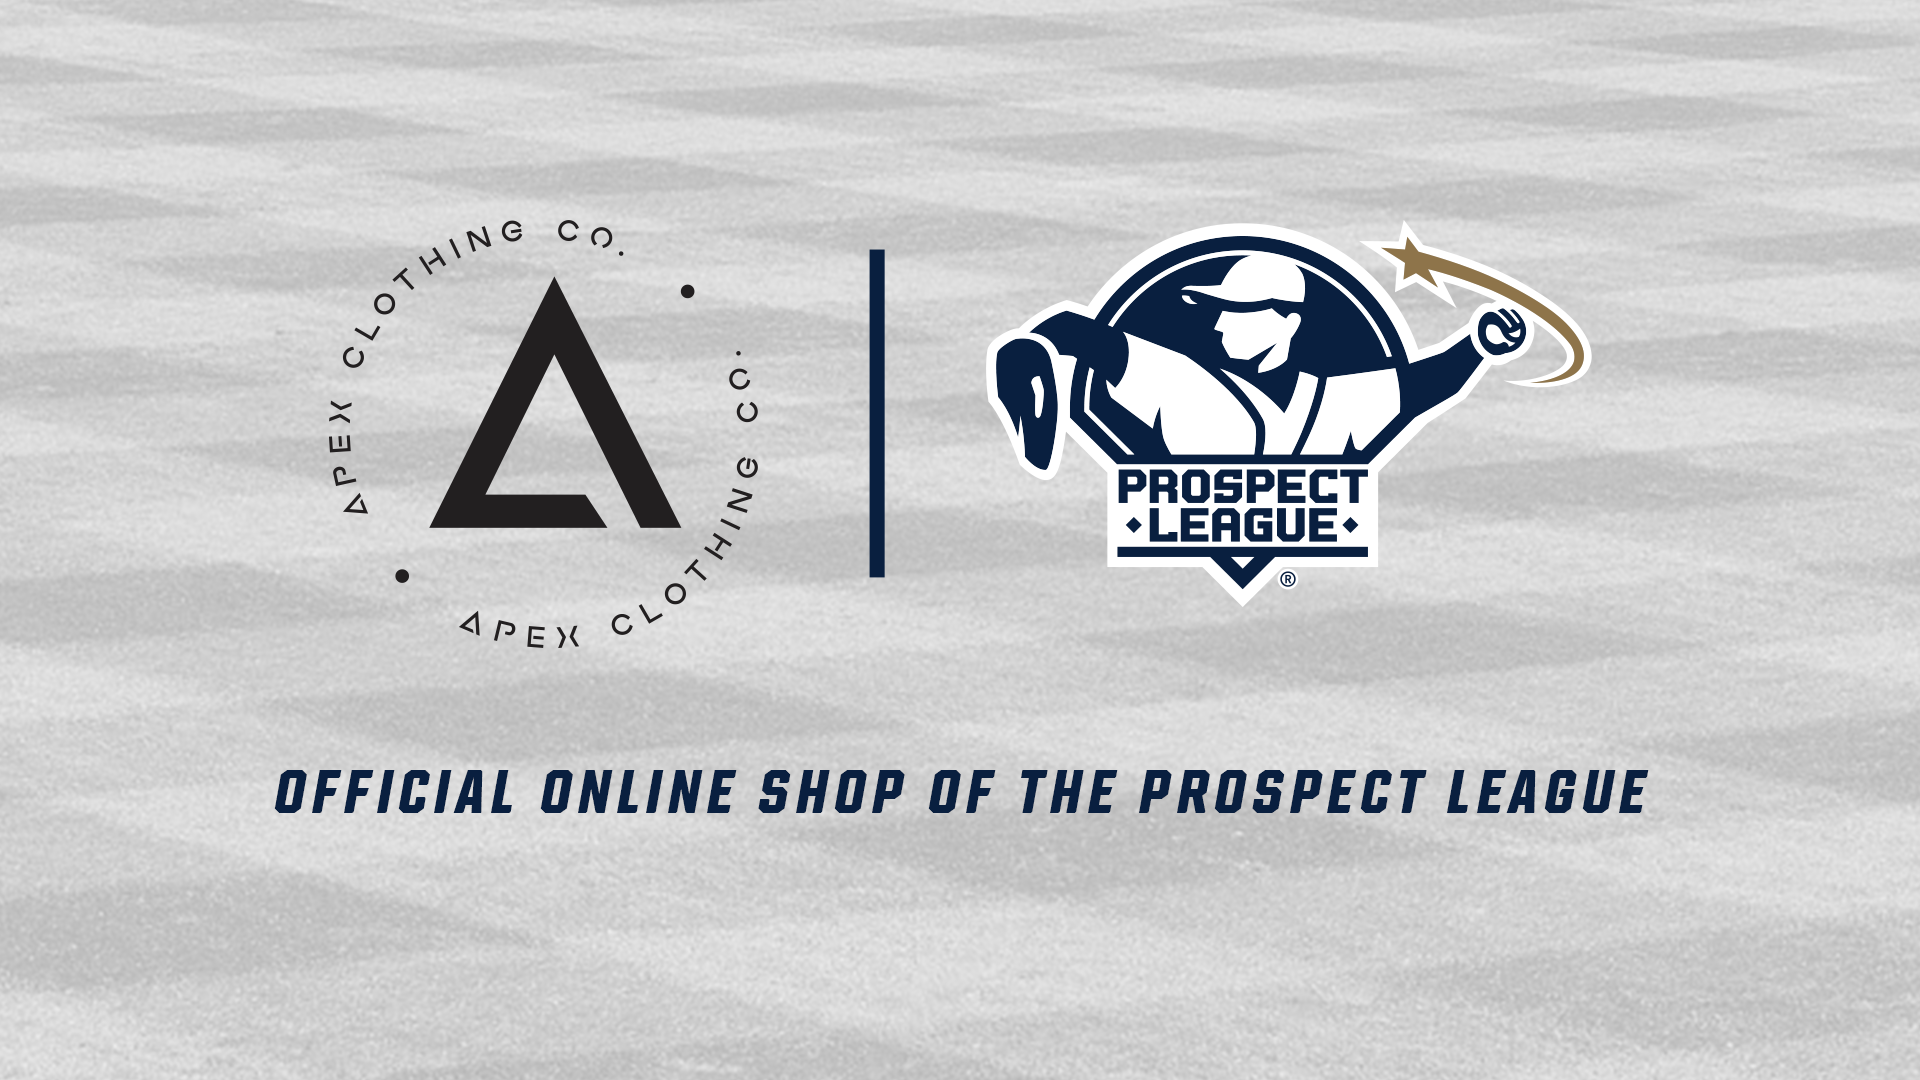 Prospect League Teams with Apex Clothing Co. for New Online Store